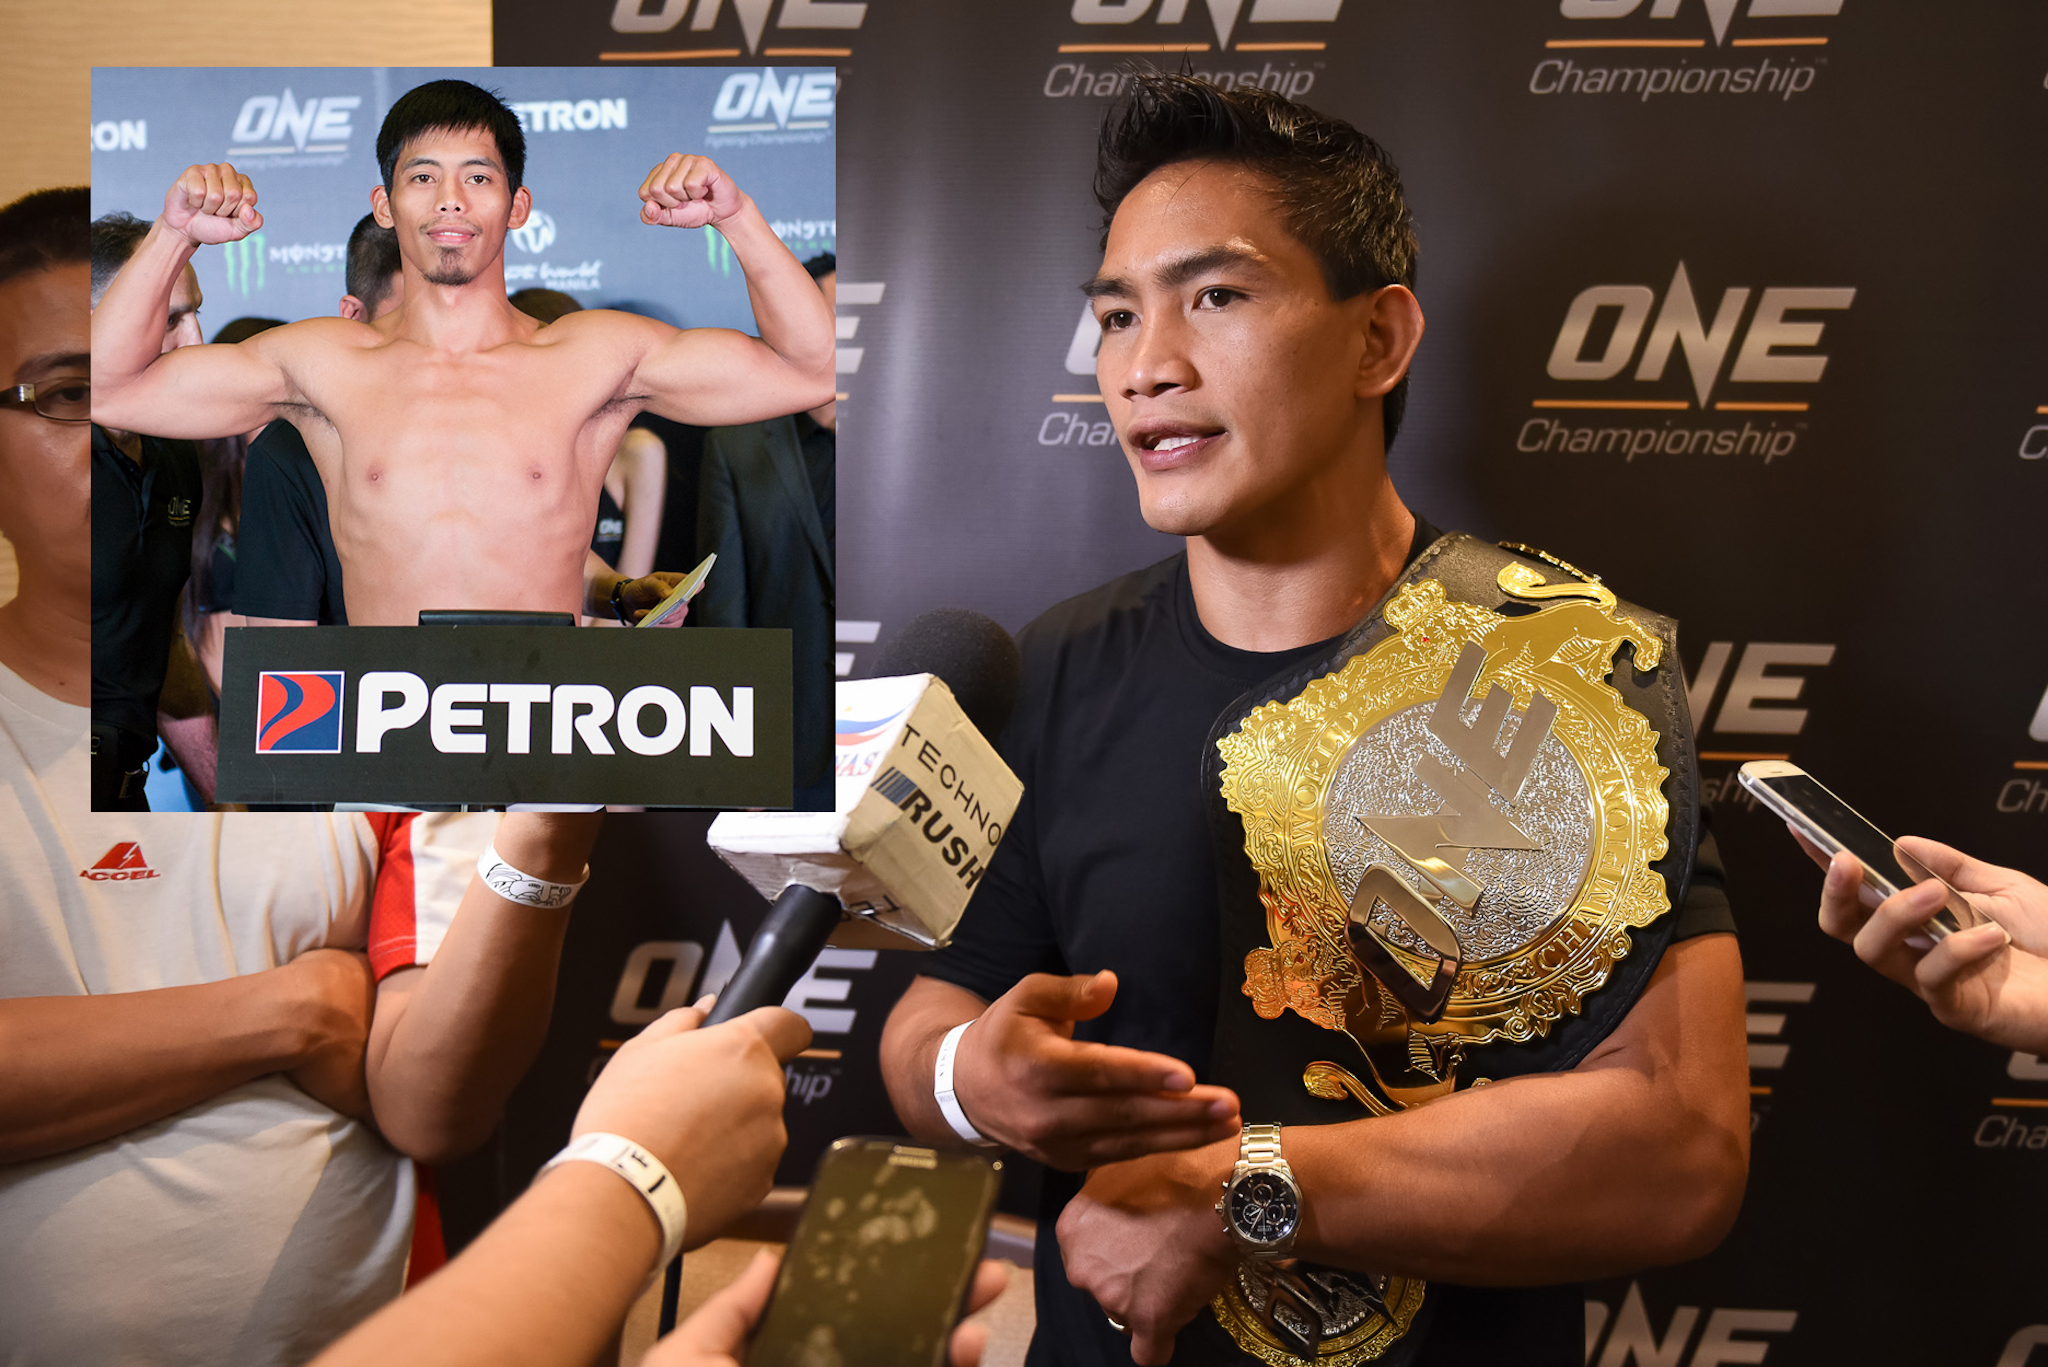 Folayang confident Banario will bounce back from 2 tough losses